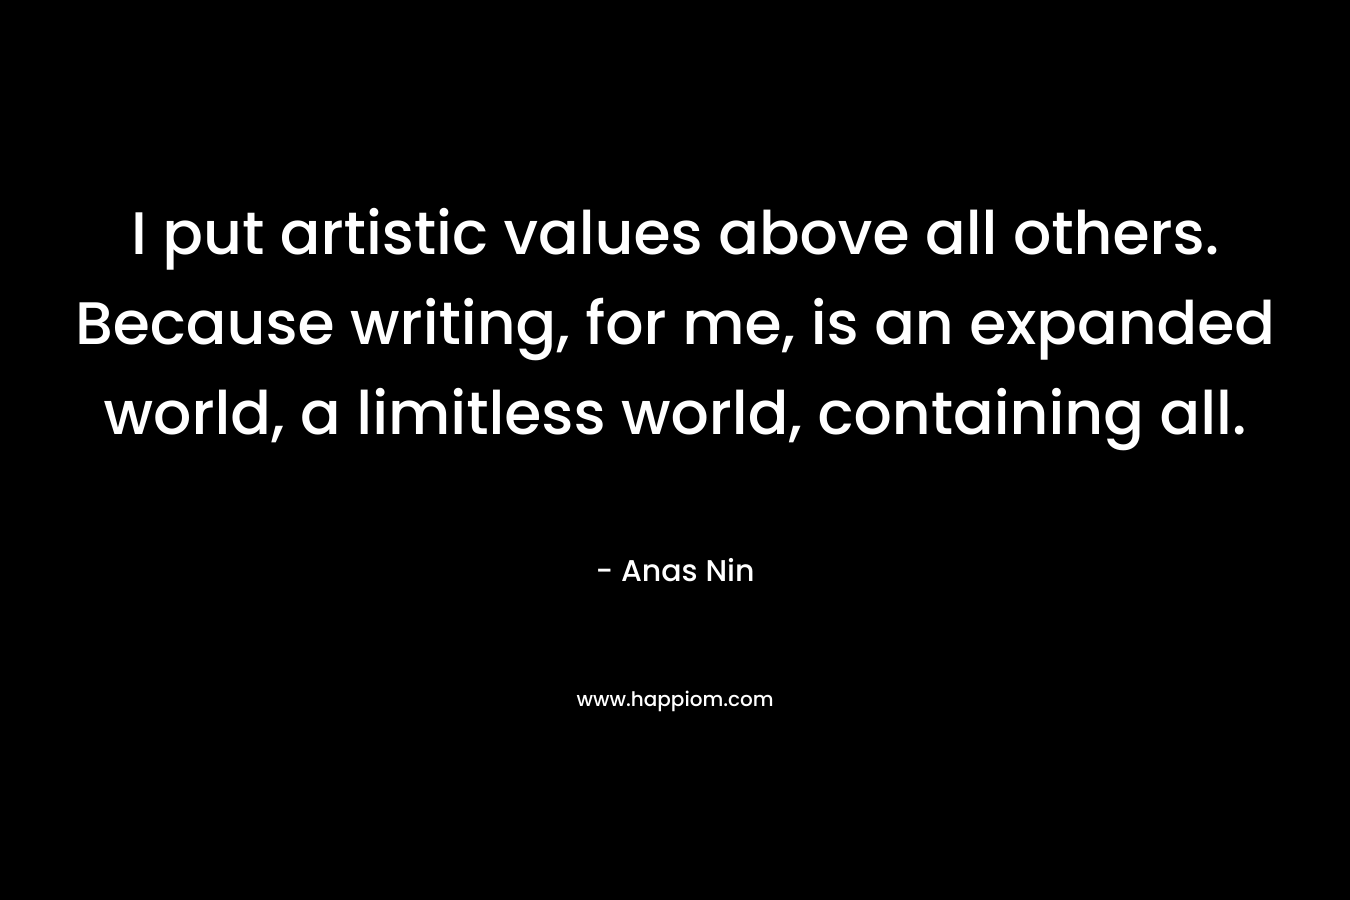 I put artistic values above all others. Because writing, for me, is an expanded world, a limitless world, containing all. – Anas Nin